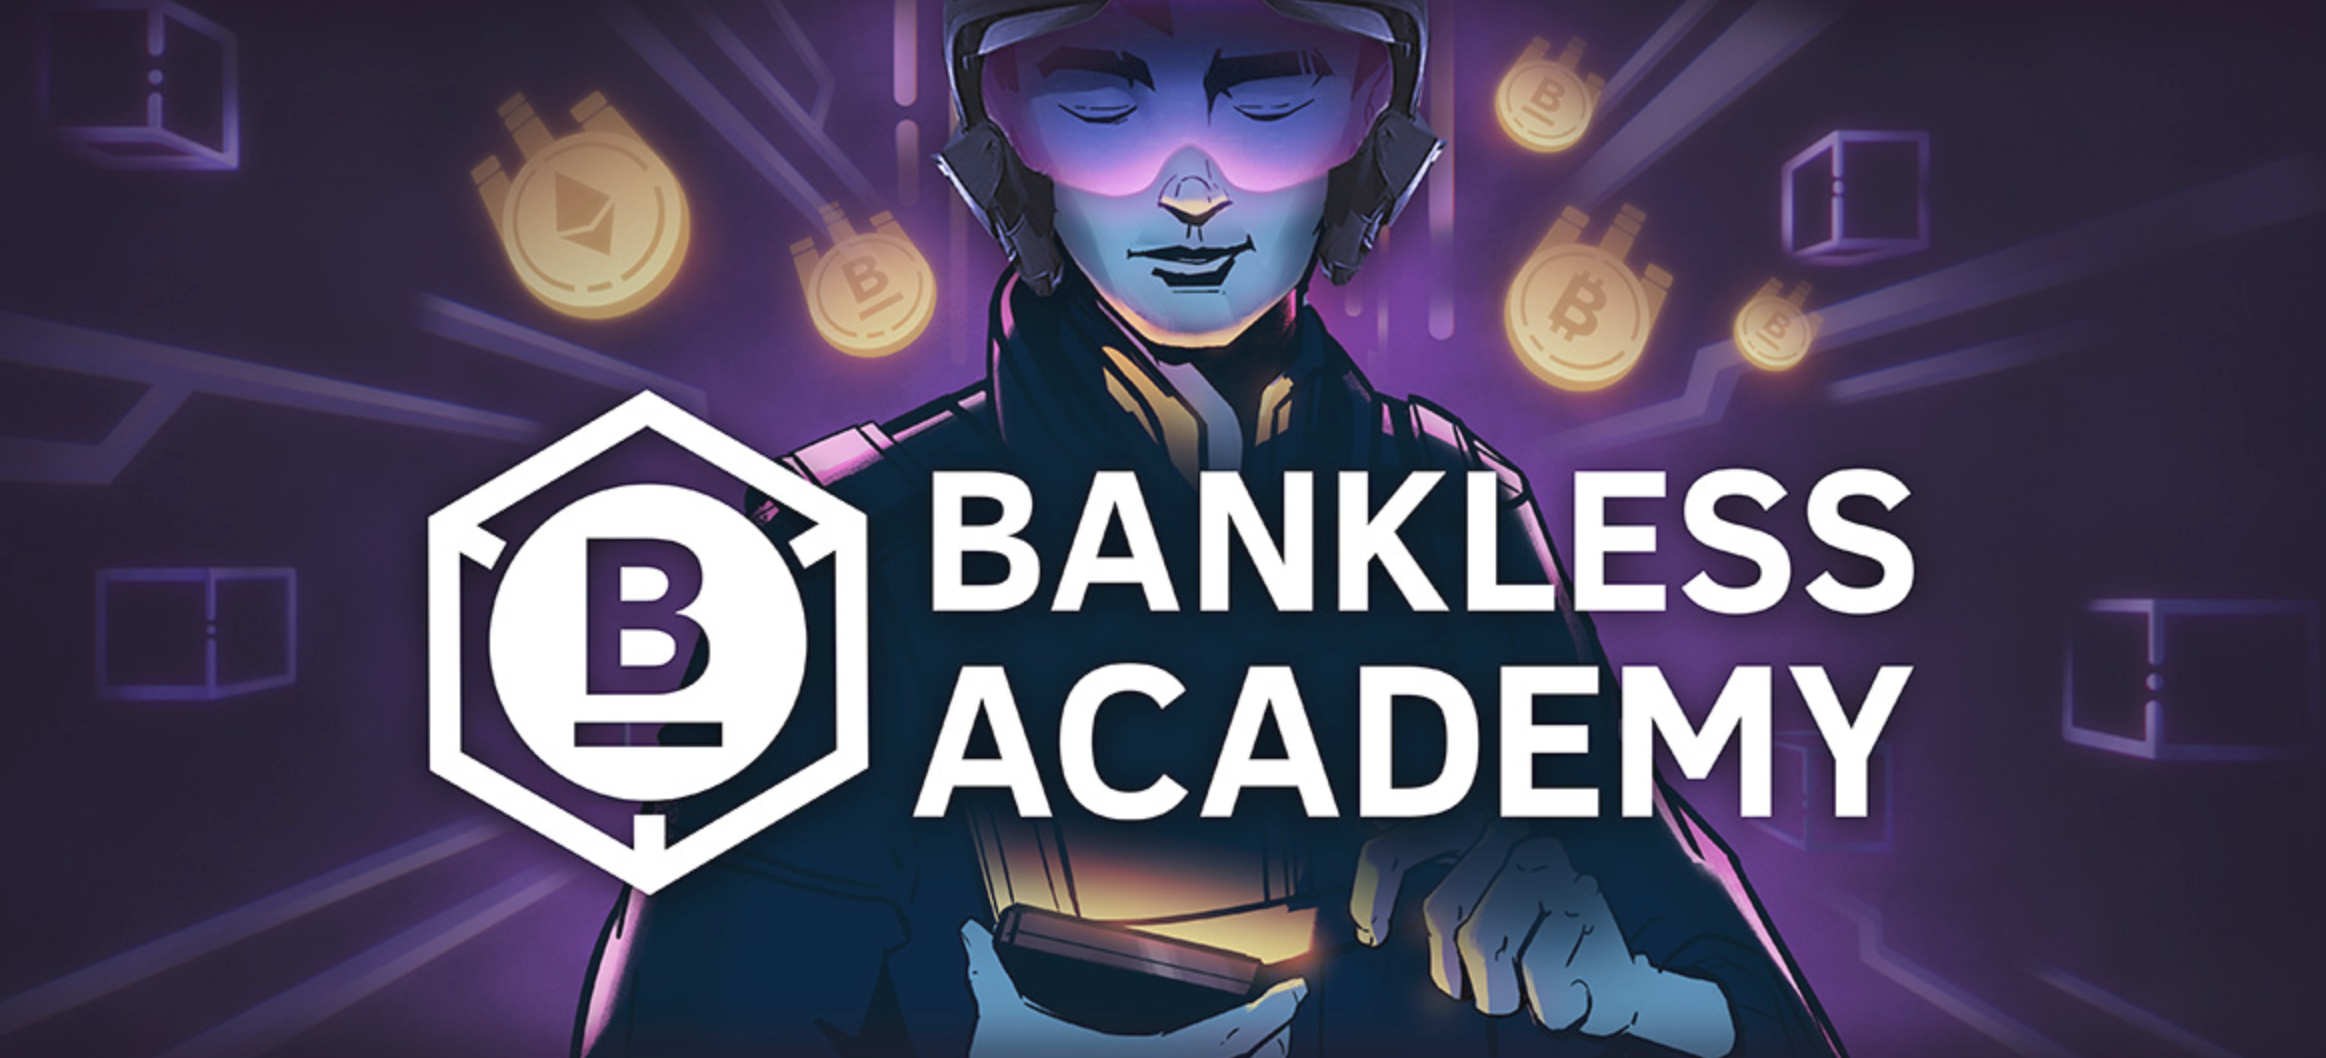 Bankless Academy